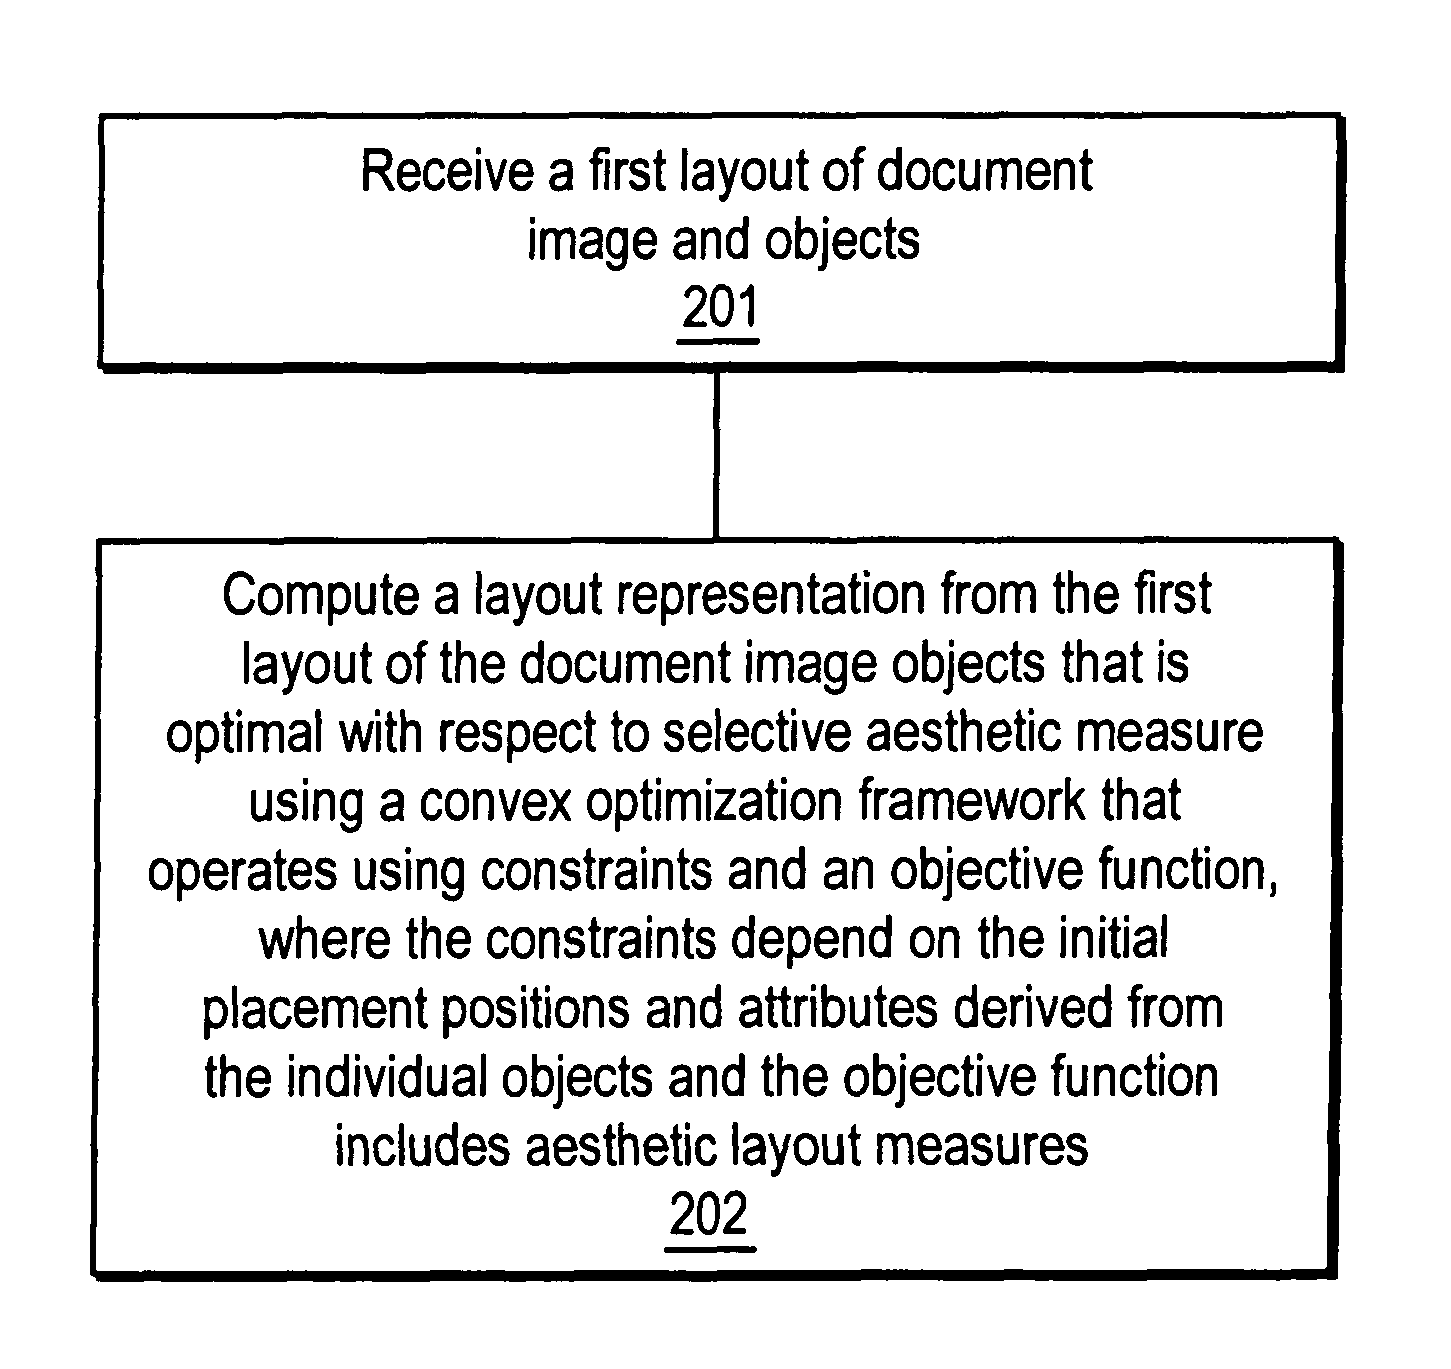 Automated document layout design